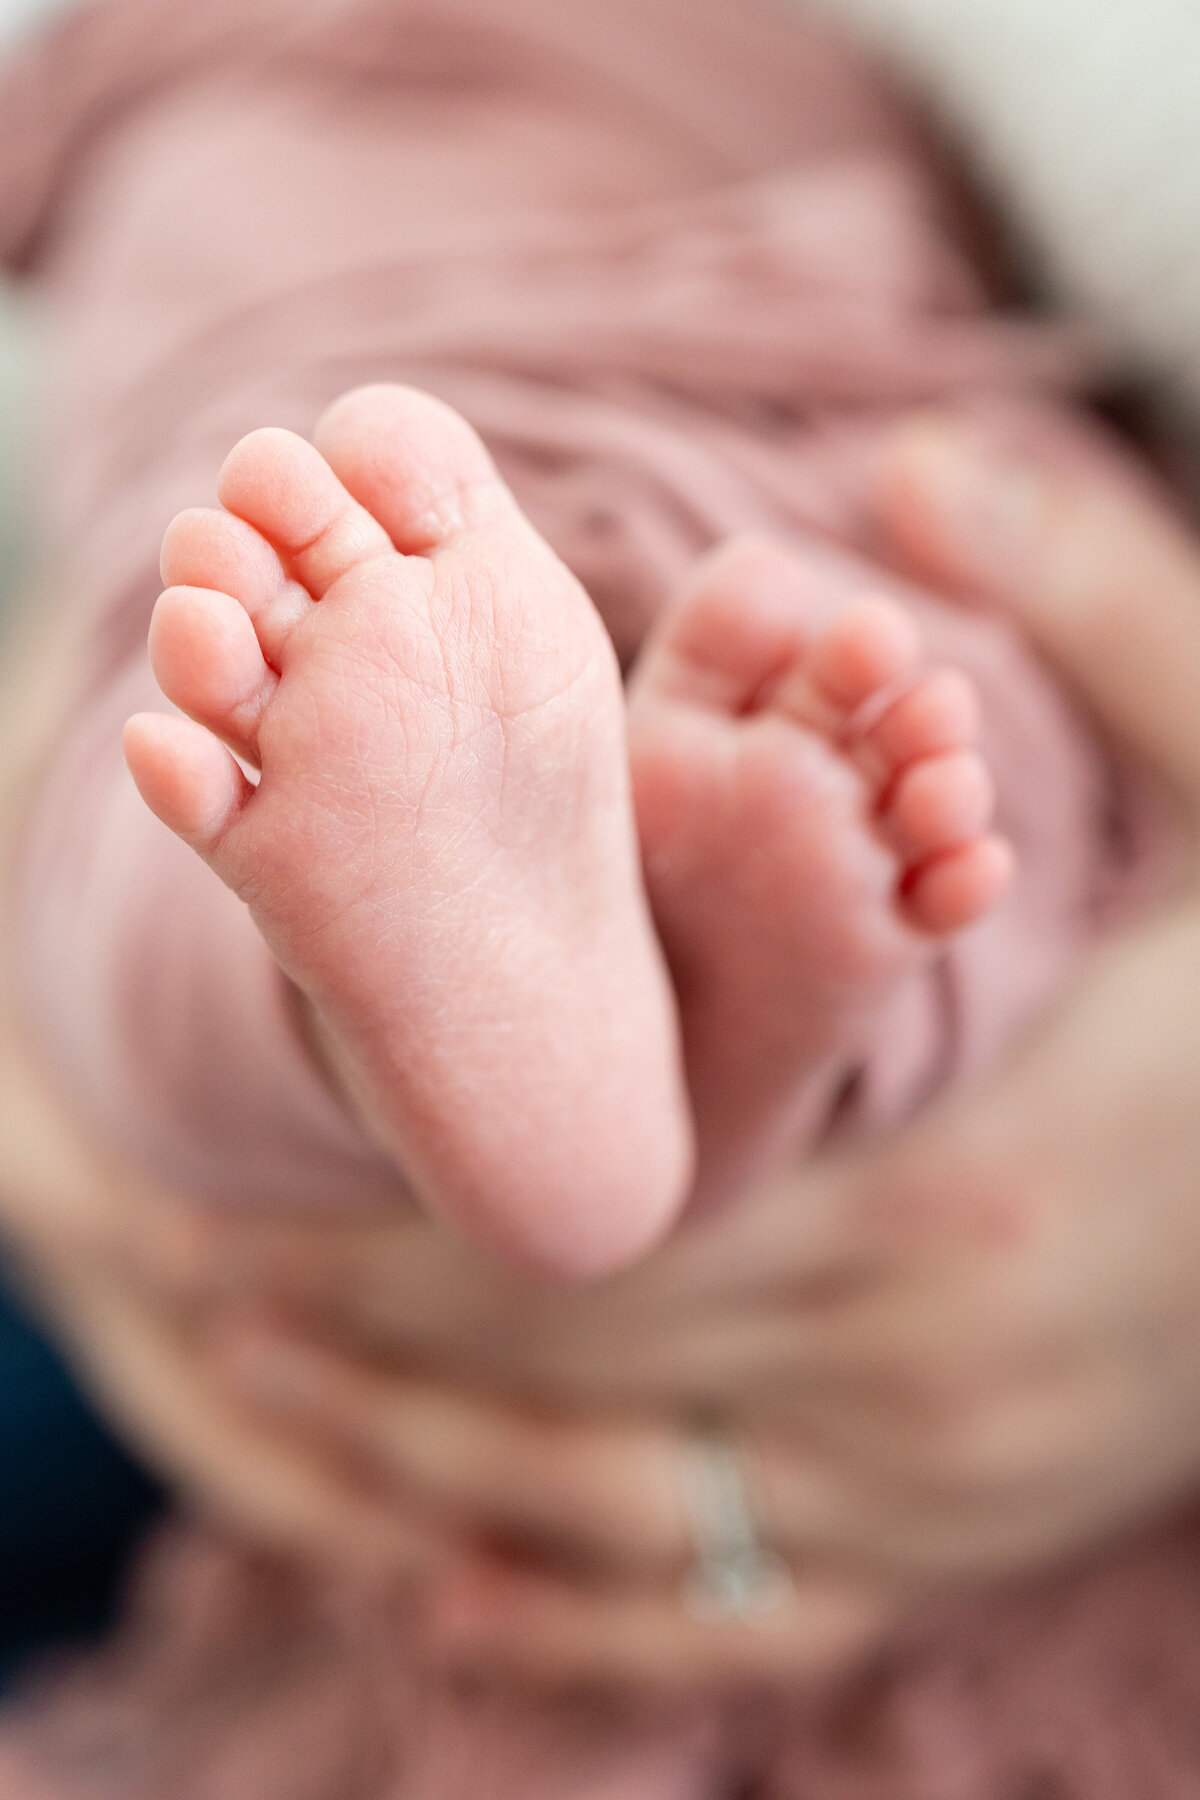 Baby Feet being held by mother's hands